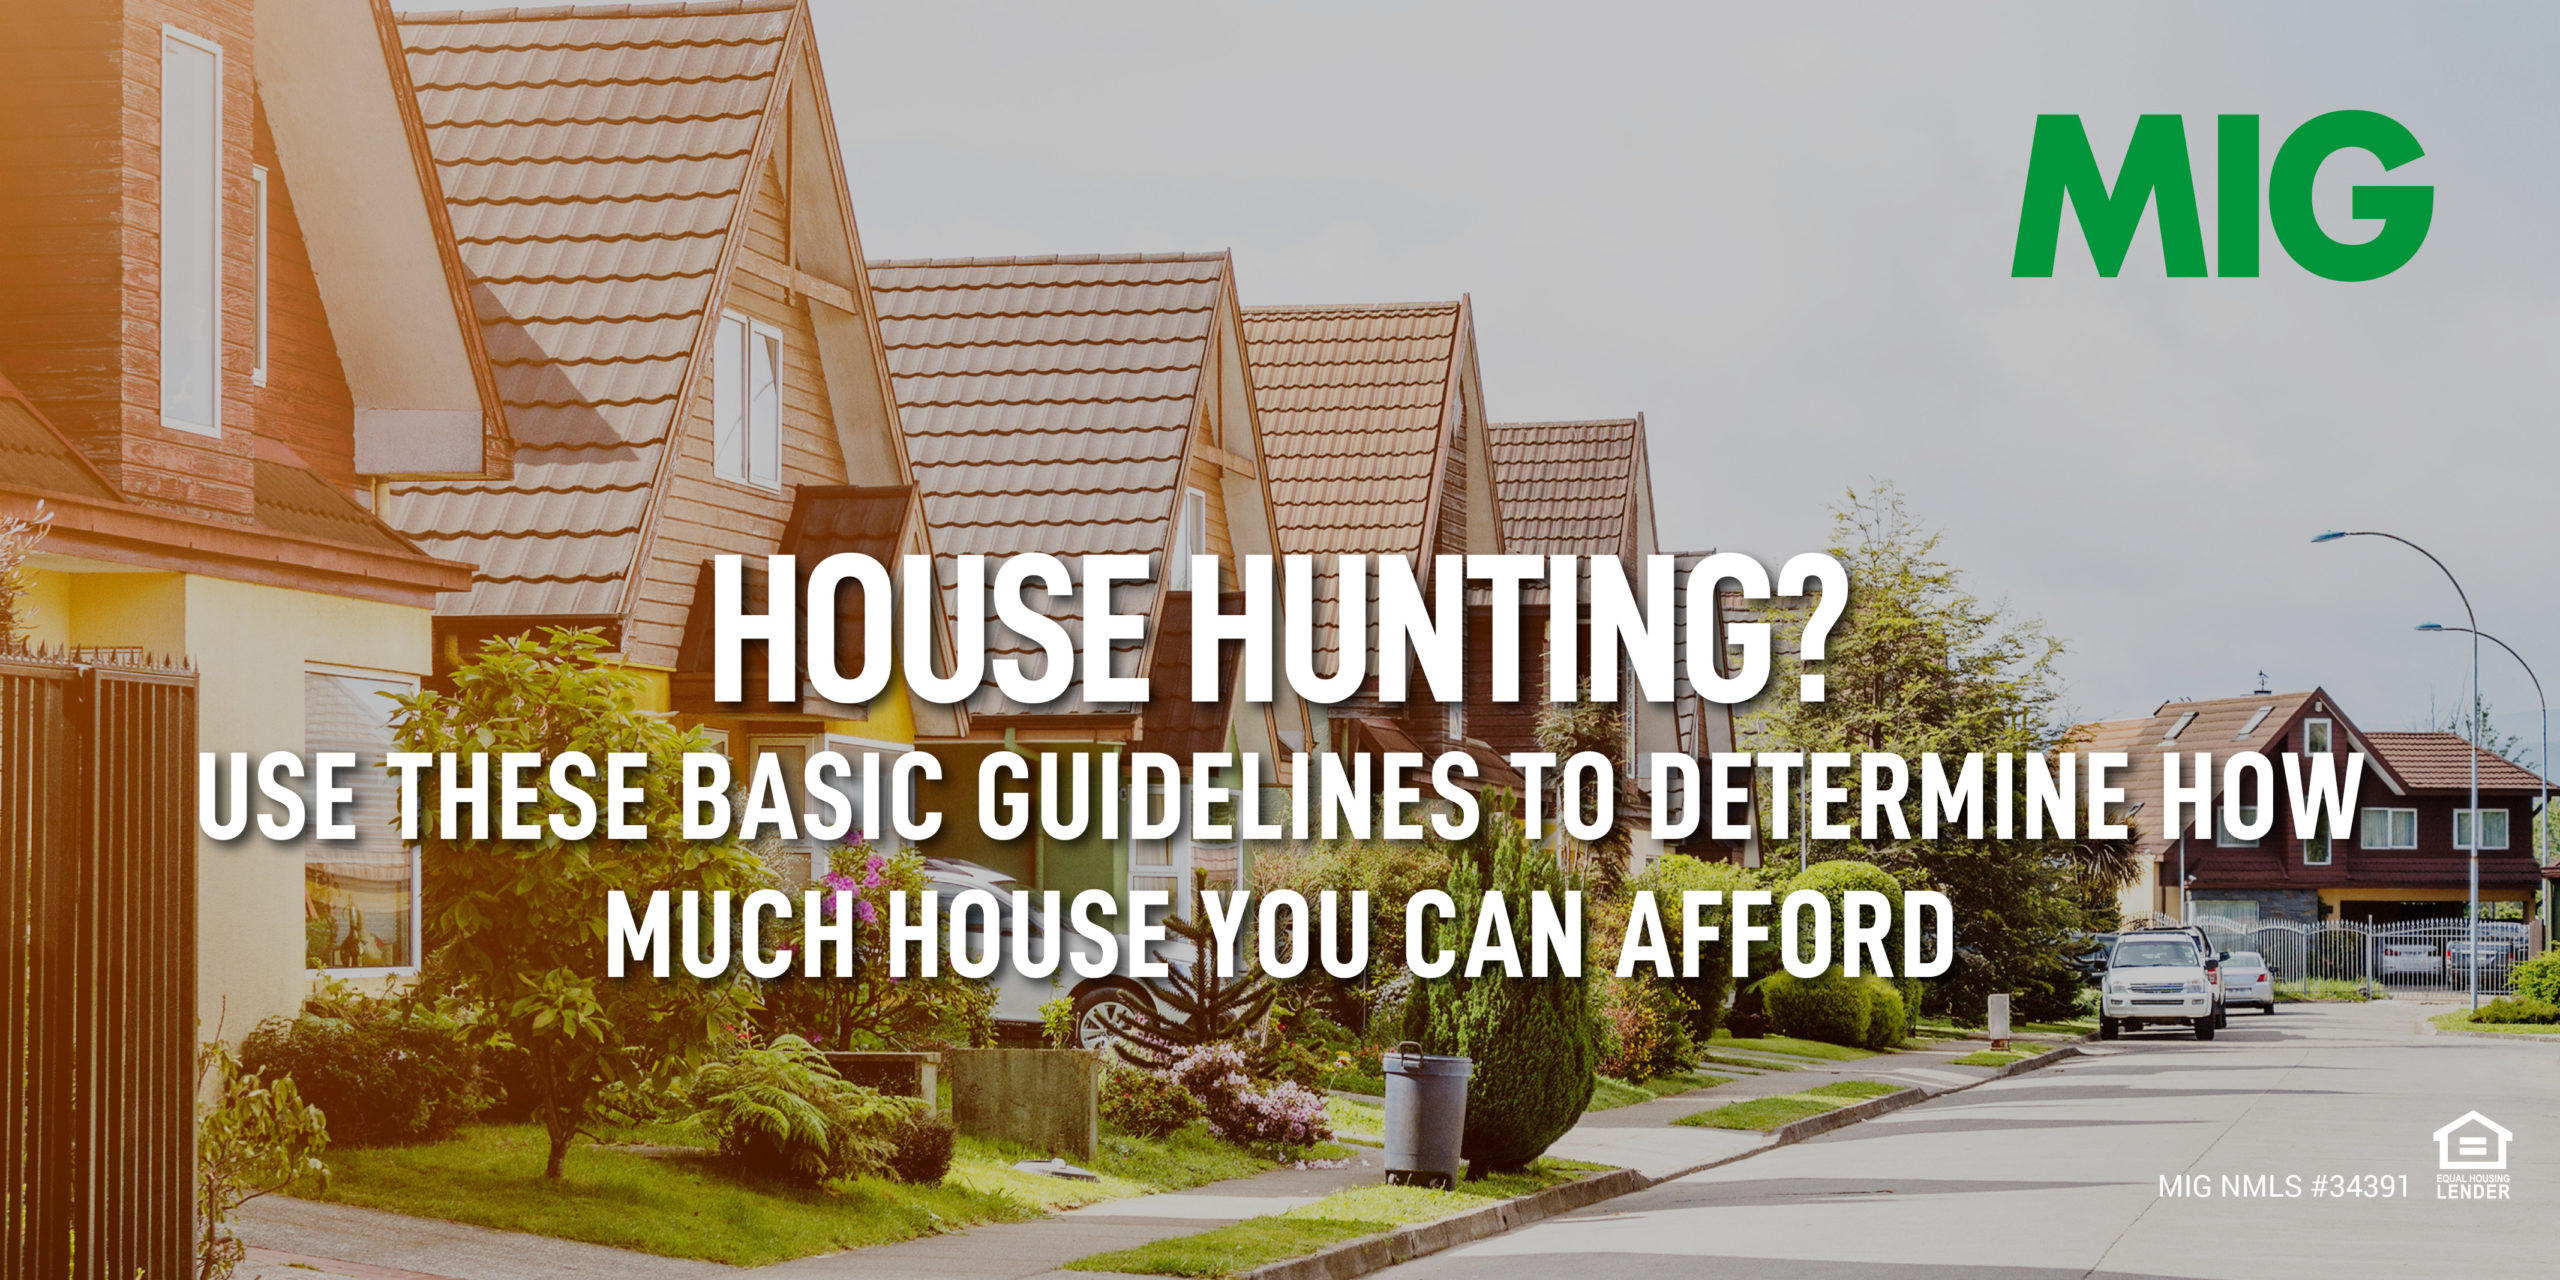 House Hunting? Use These Basic Guidelines to Determine How Much House You Can Afford